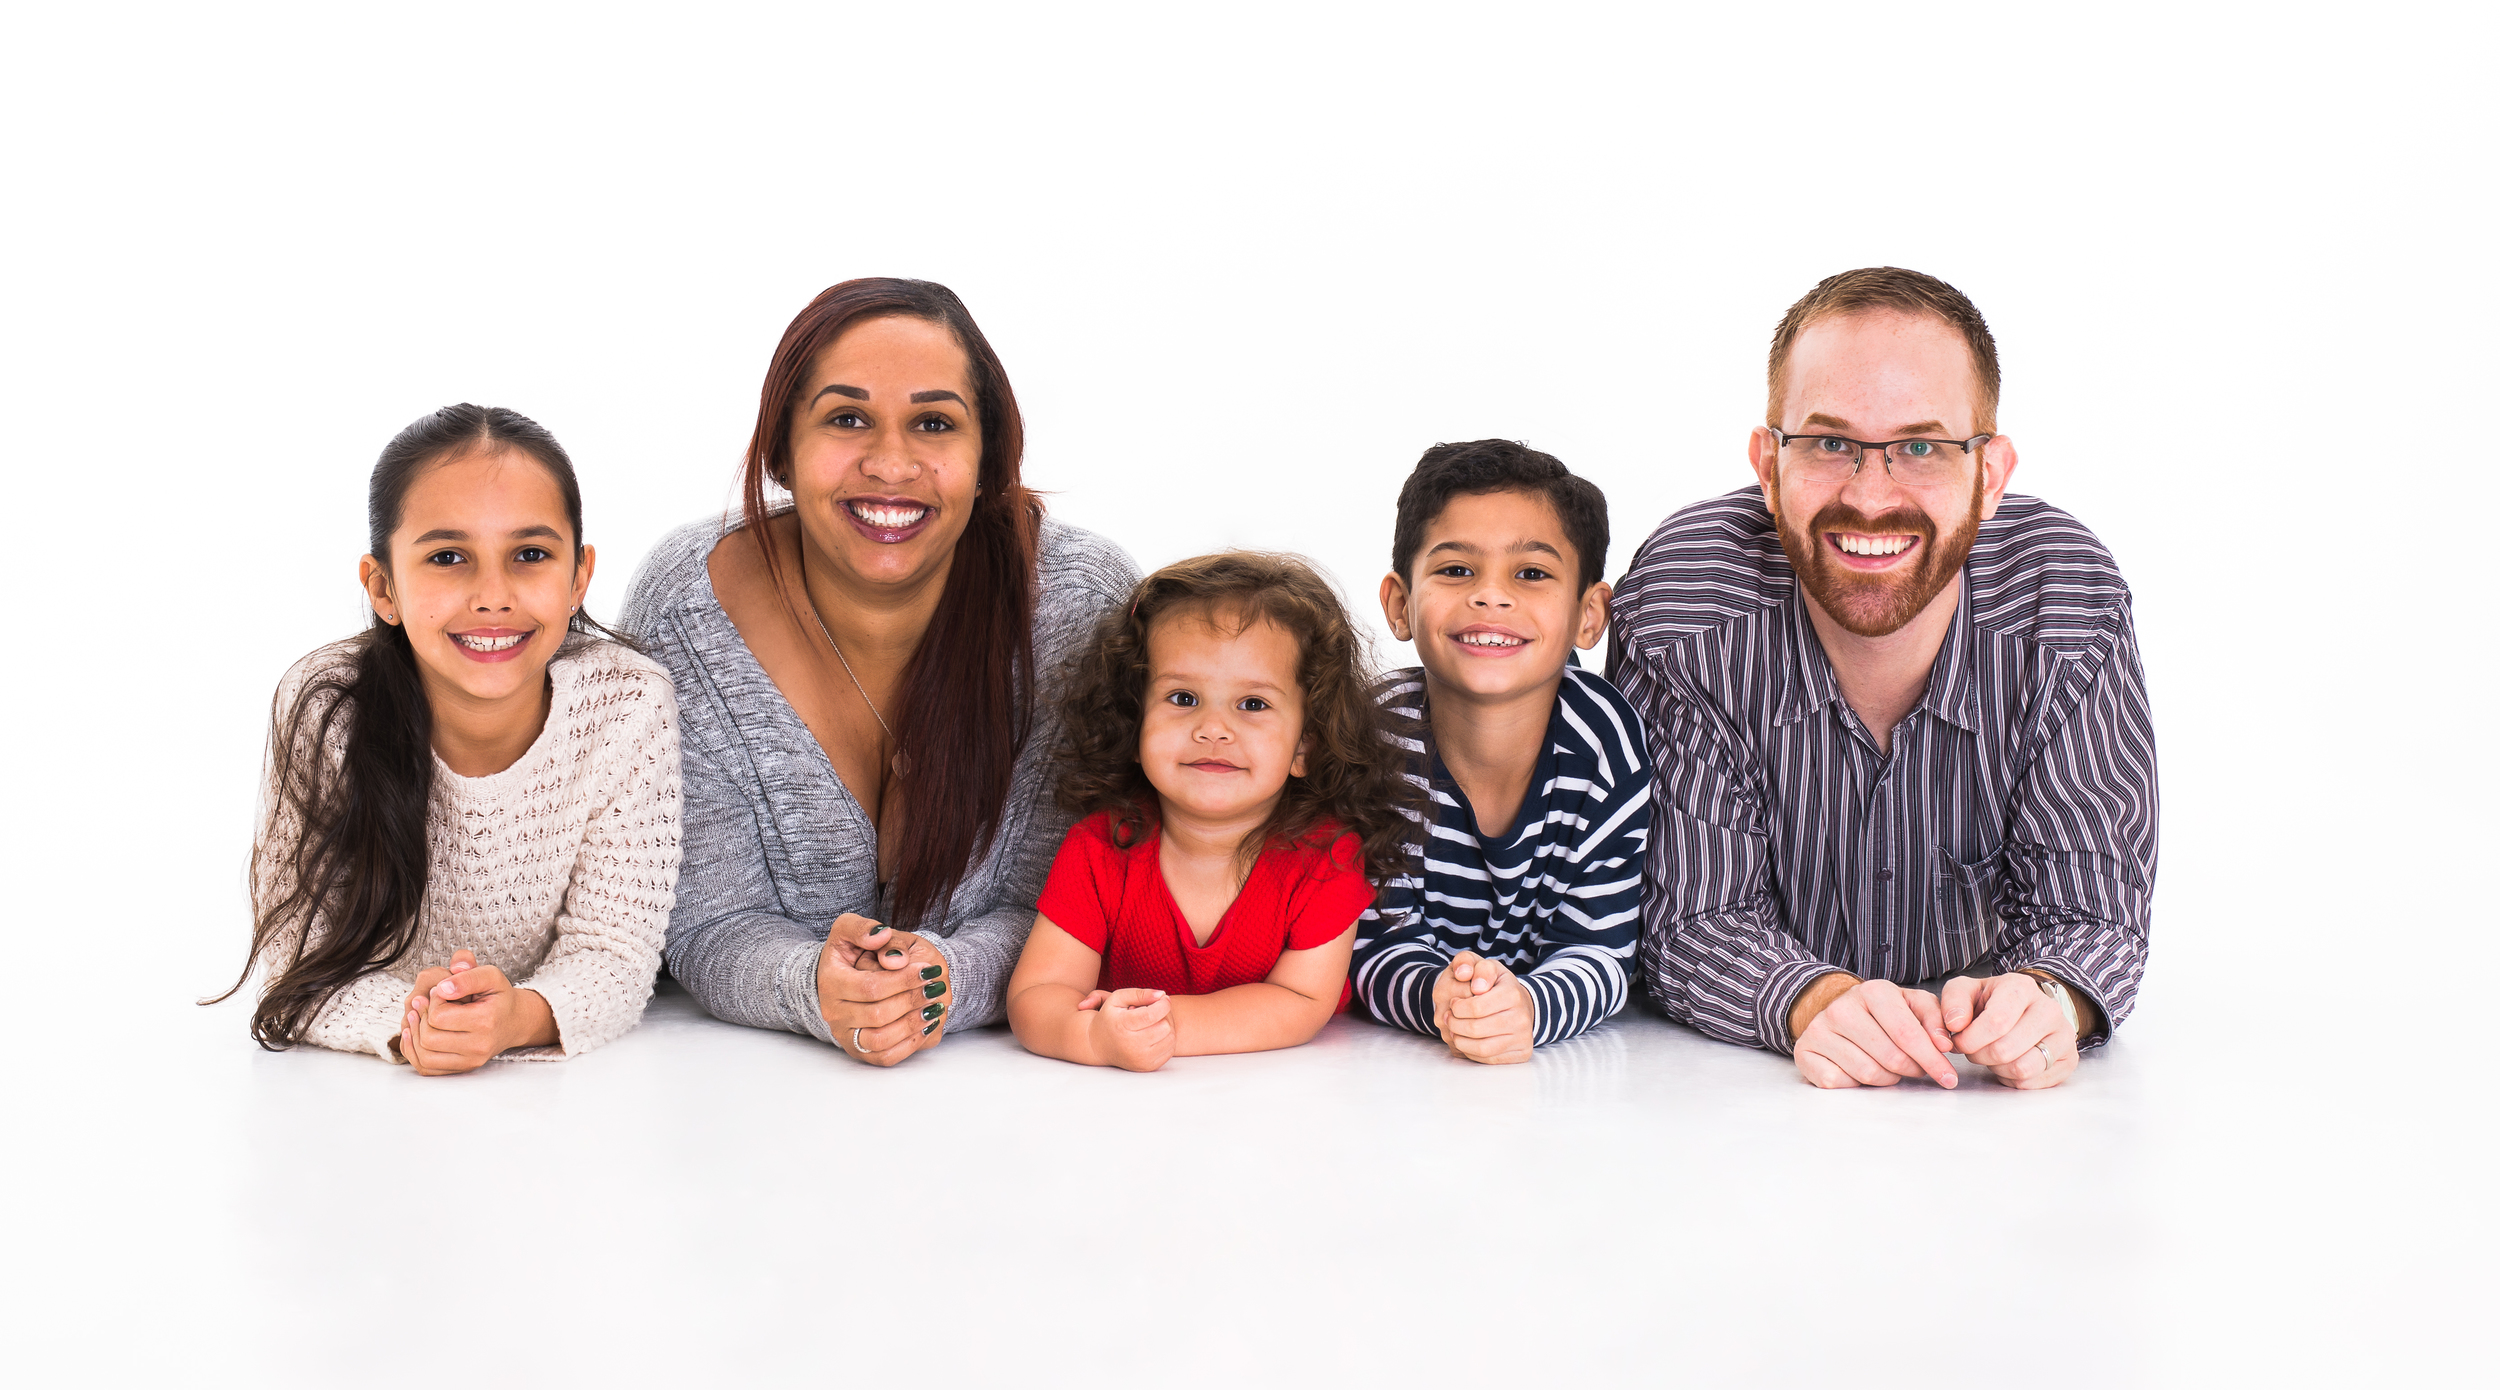 Family portraits essex, family photography essex, family portraits benfleet, family photo shoots benfleet, family photography southend, family photo shoot southend, family portraits chelmsford